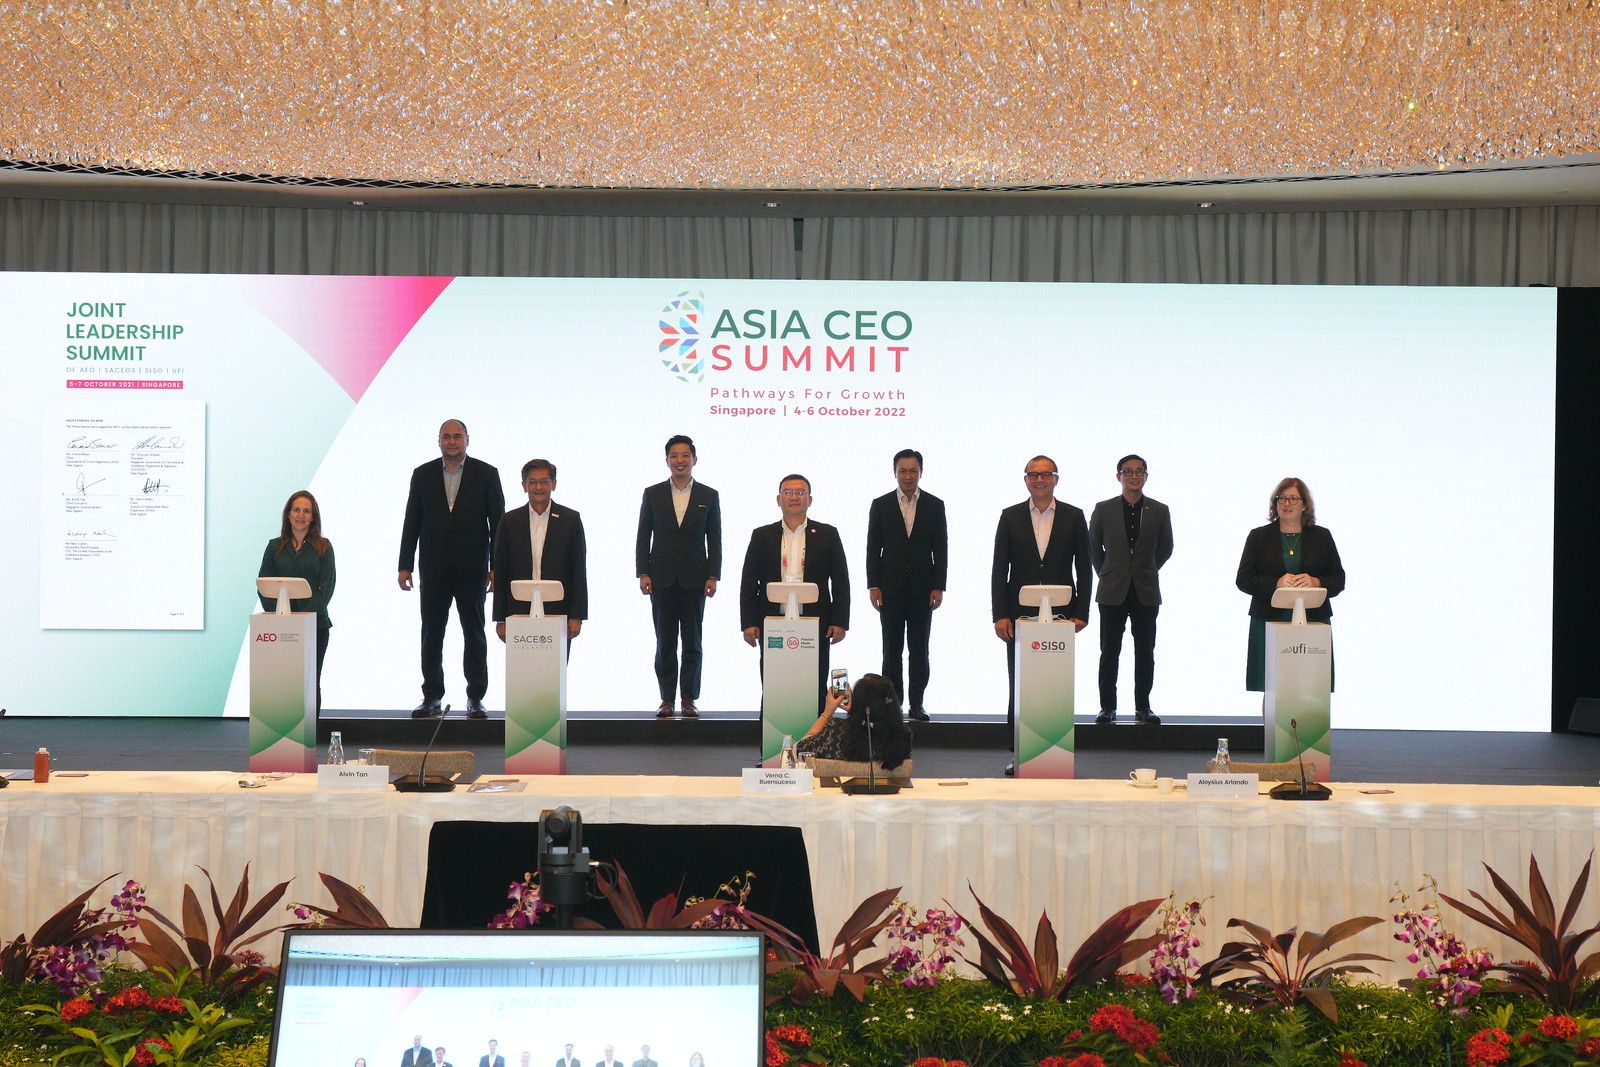 The launch of the Asia CEO Summit in Singapore will support the development and reinvigoration of the region's exhibitions industry